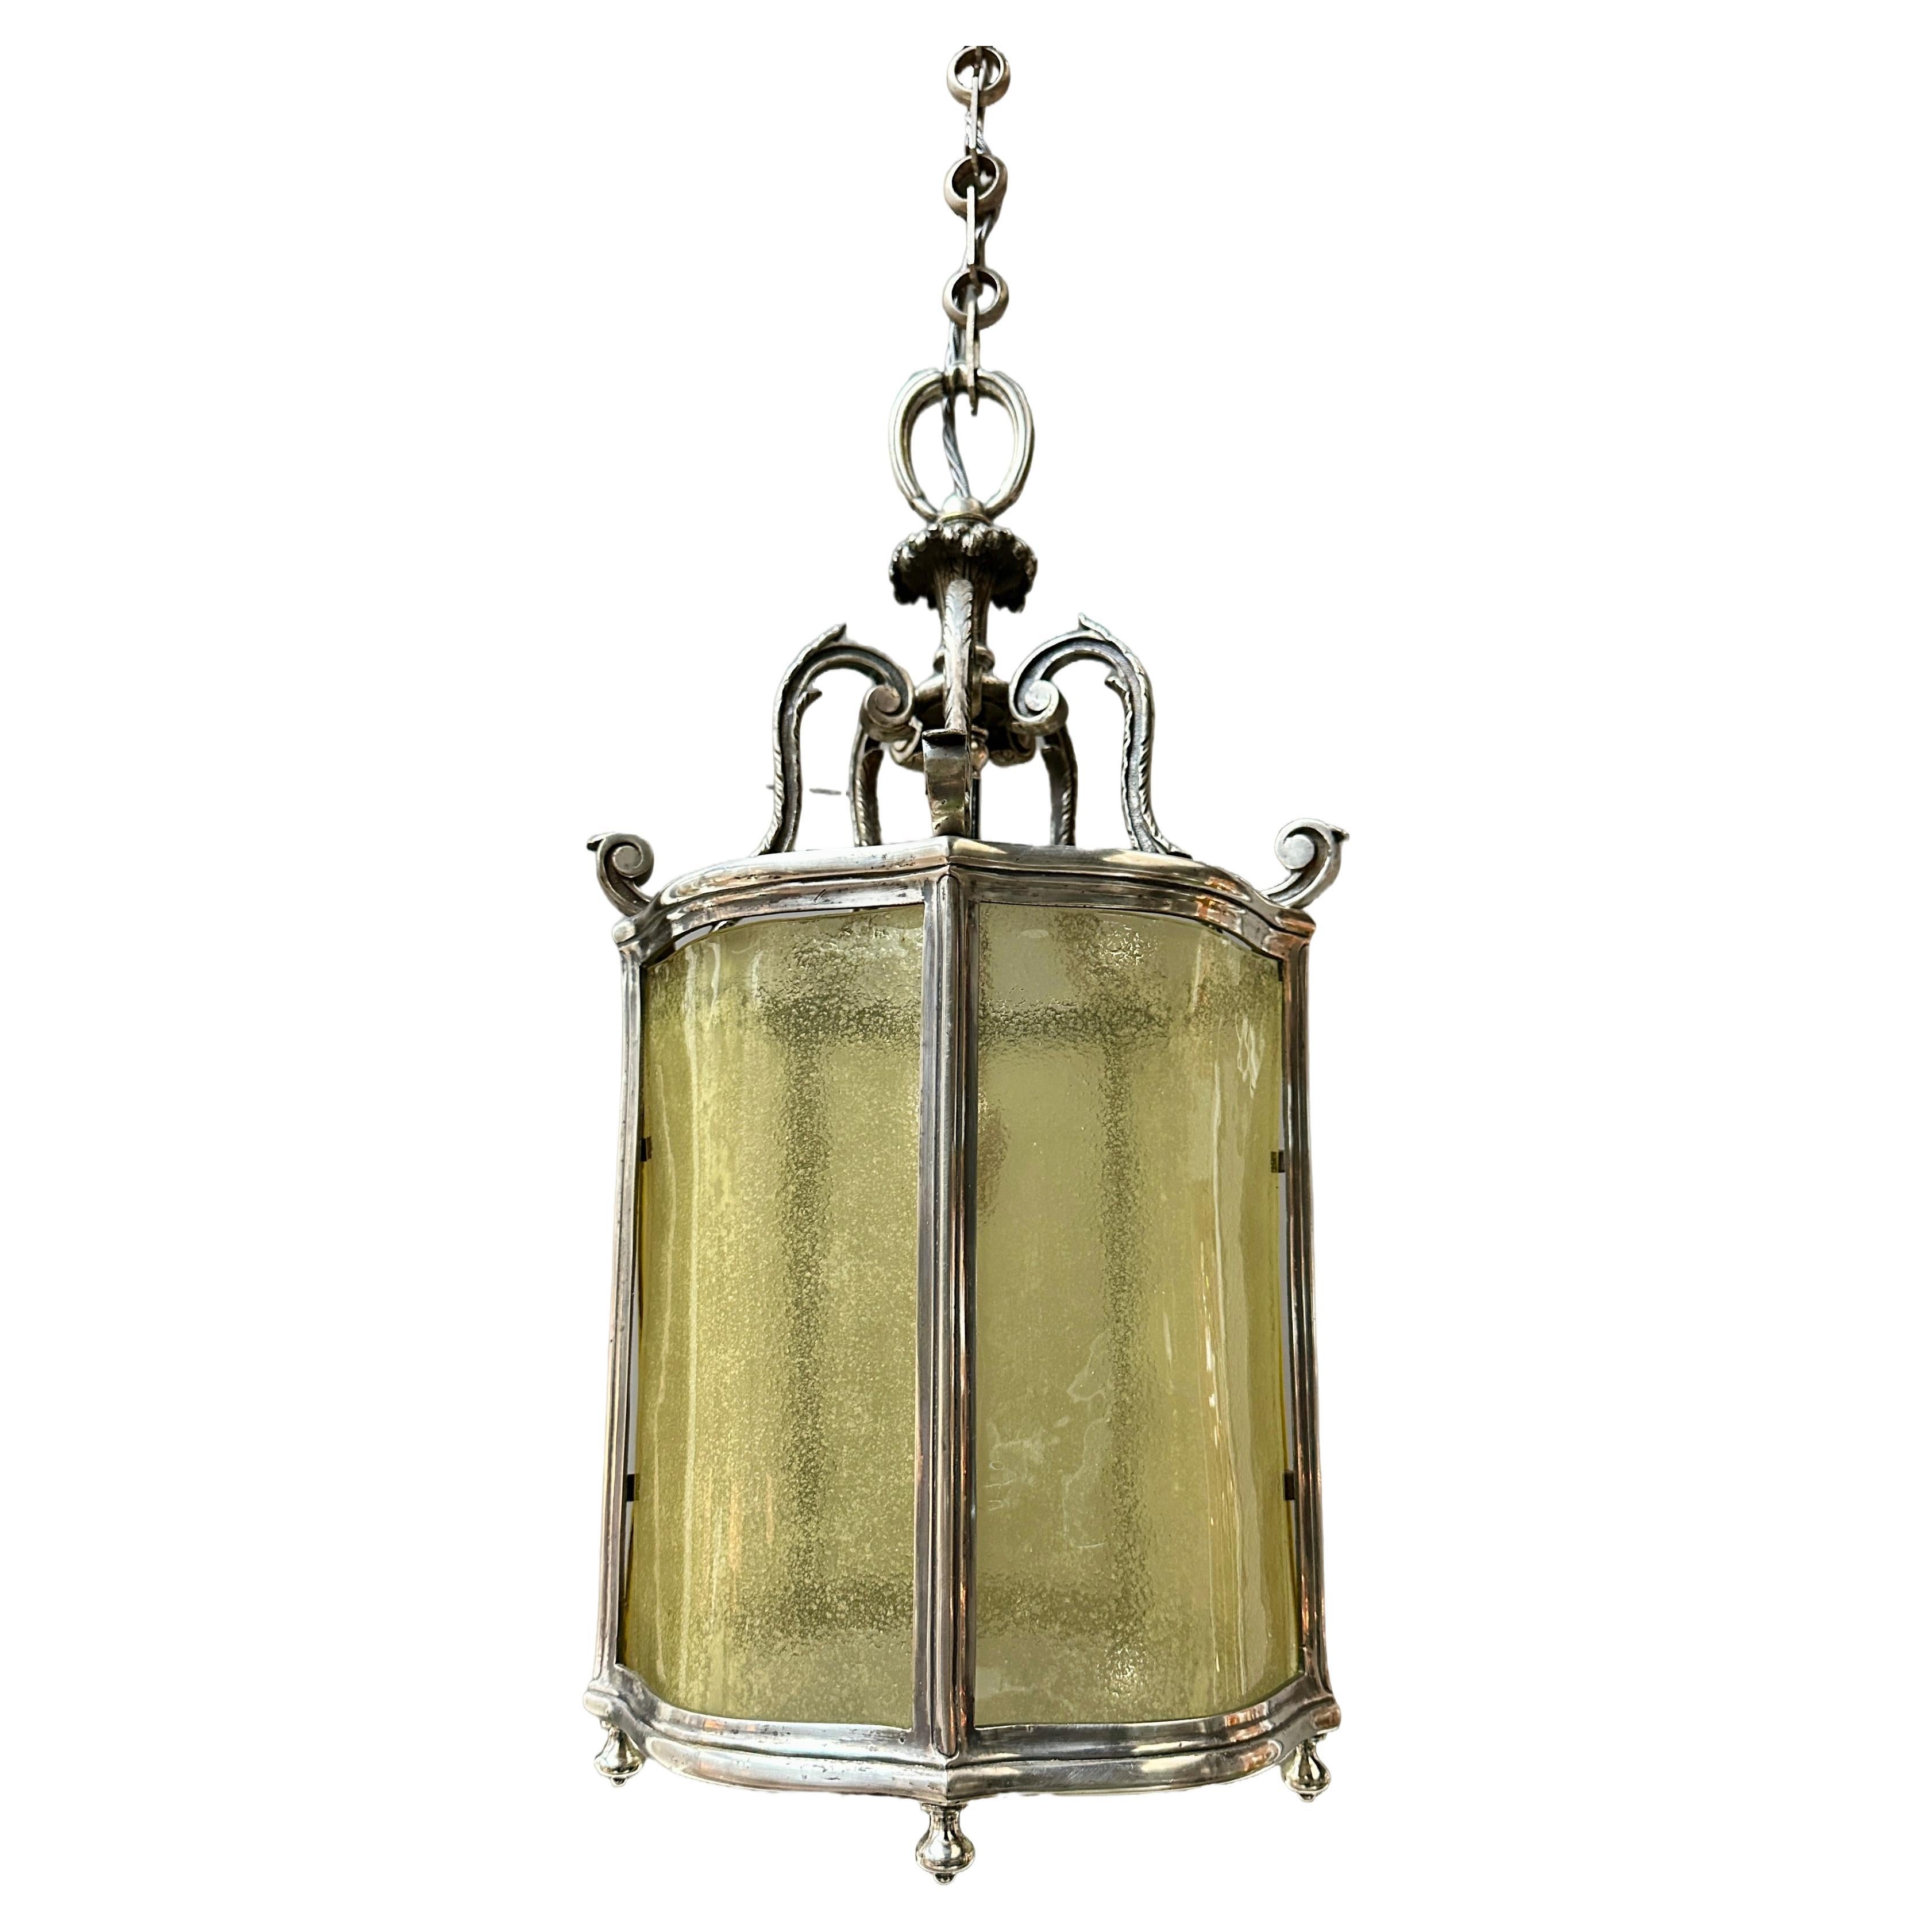 A Classical Nickel And Curved Murano Glass Italian Lantern 